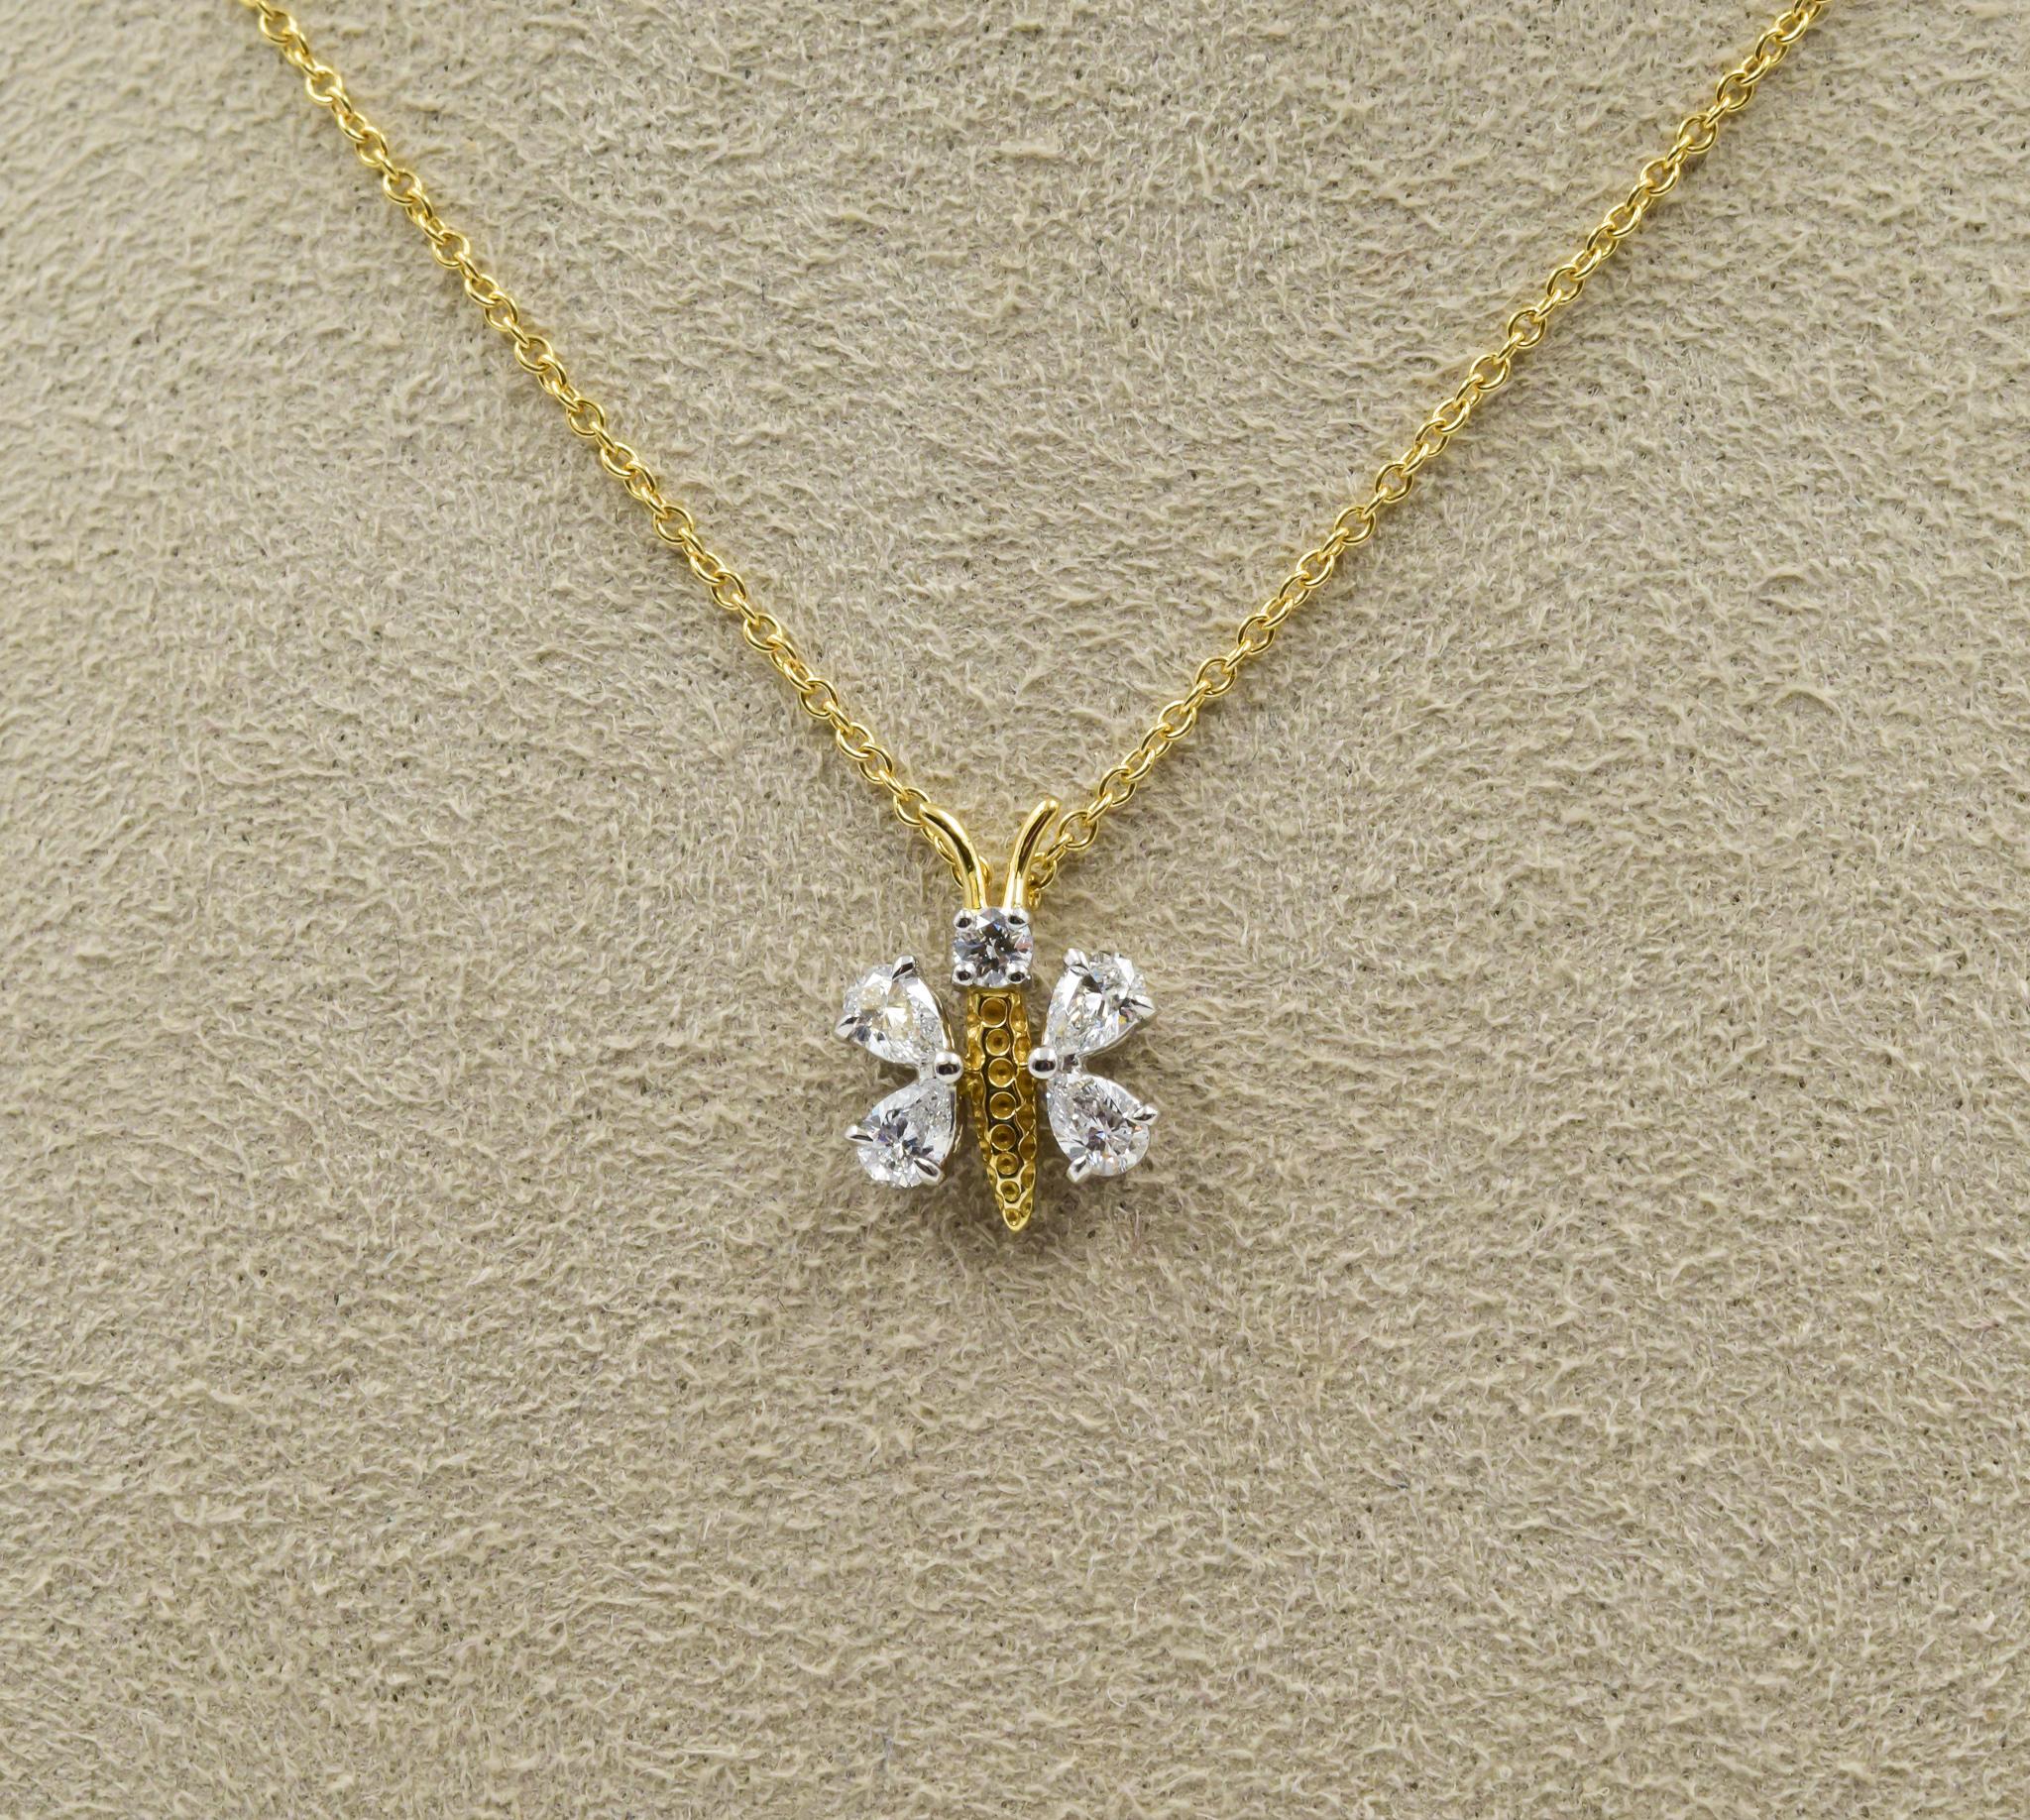 This is a previously owned Tiffany & Co necklace known as the Lynn Pendant within the Schlumberger collection. This is a beautiful piece which can be worn in various styles.  The pendant is in 18k yellow gold and platinum.  There are four round